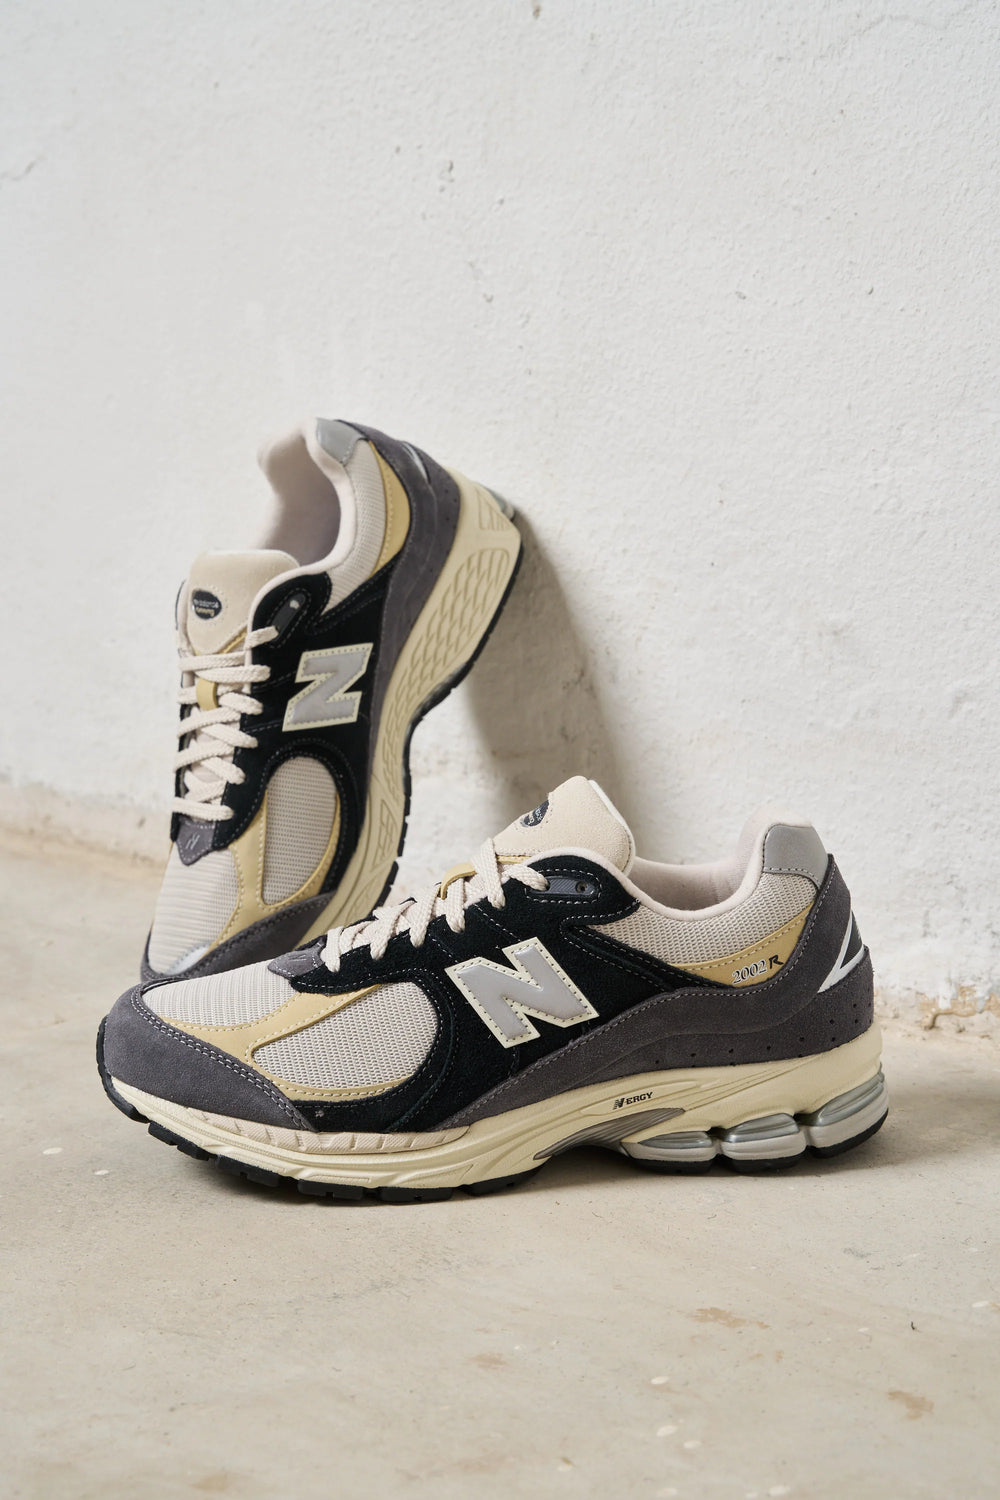 The New New Balance Autumn Winter 2023 Men's Collection is now available